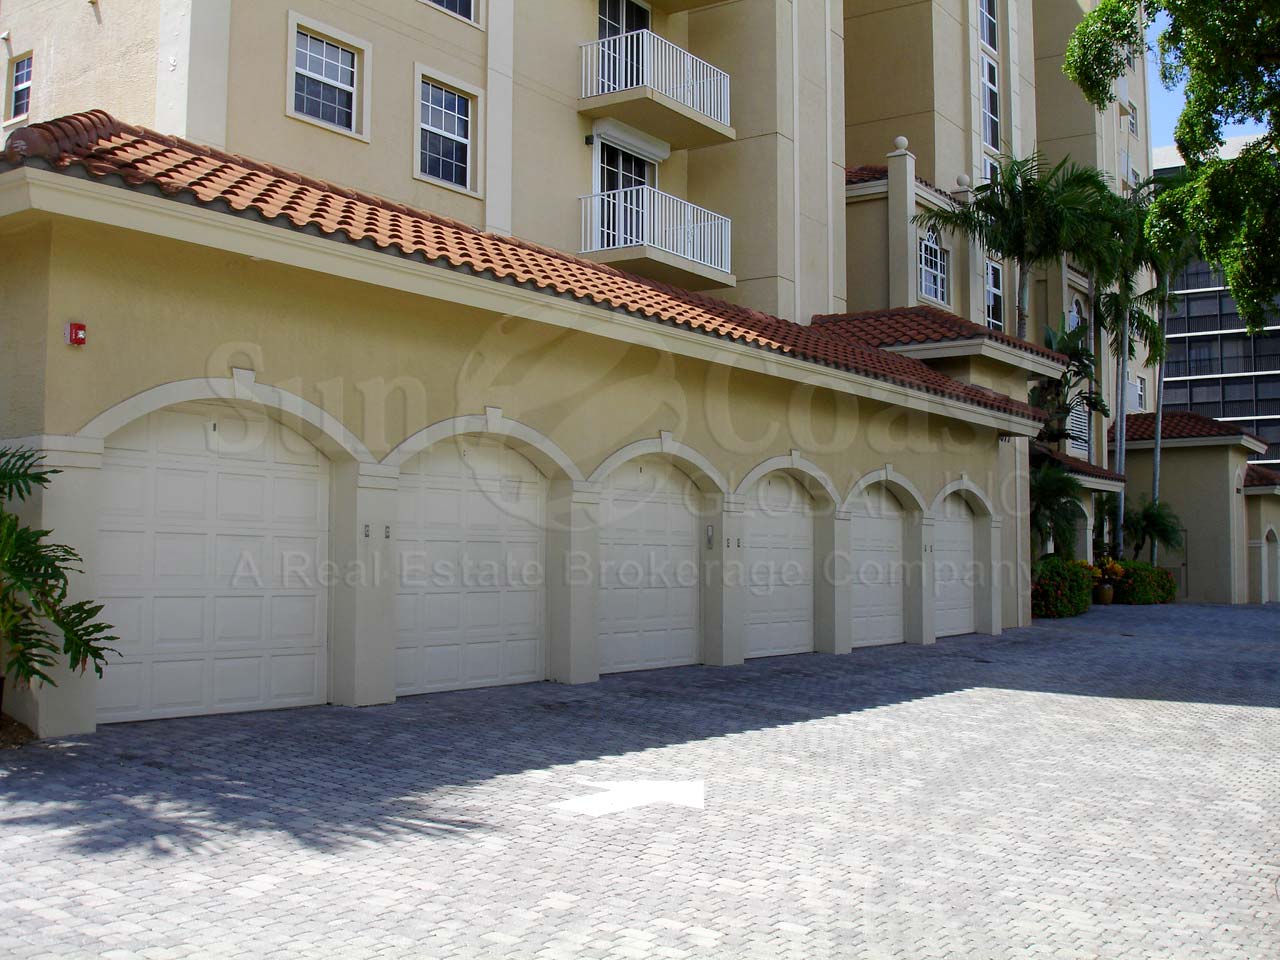 Sea Chase Attached Garages